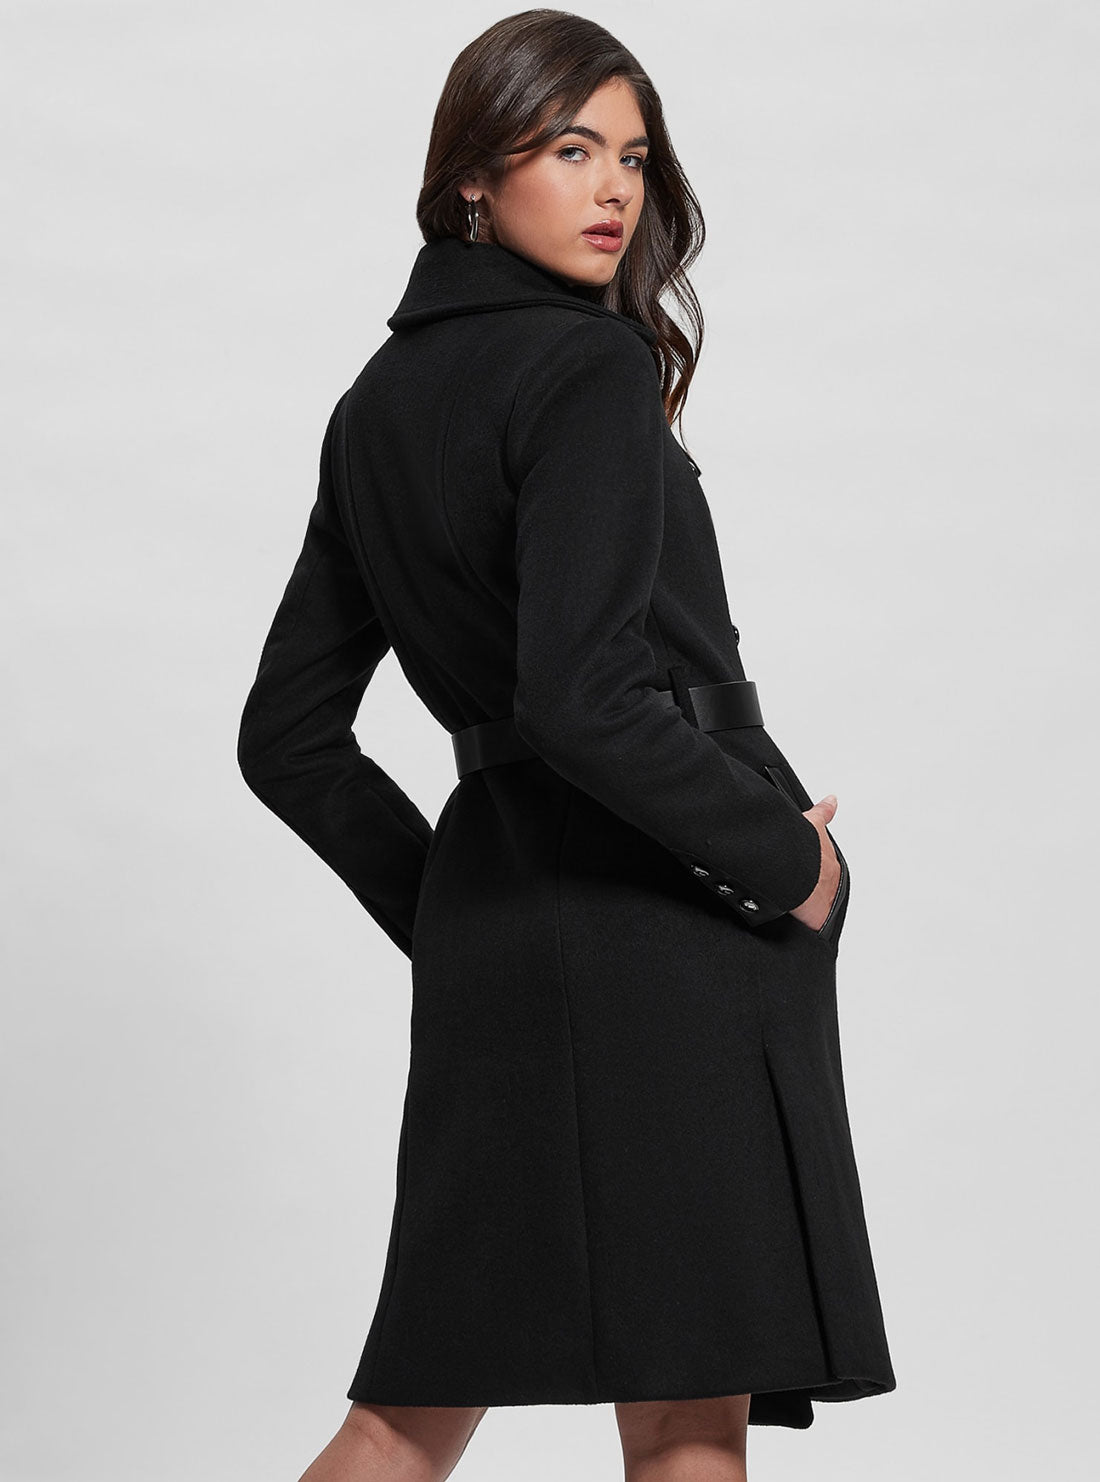 Black Patrice Belted Coat | GUESS Women's Apparel | back view